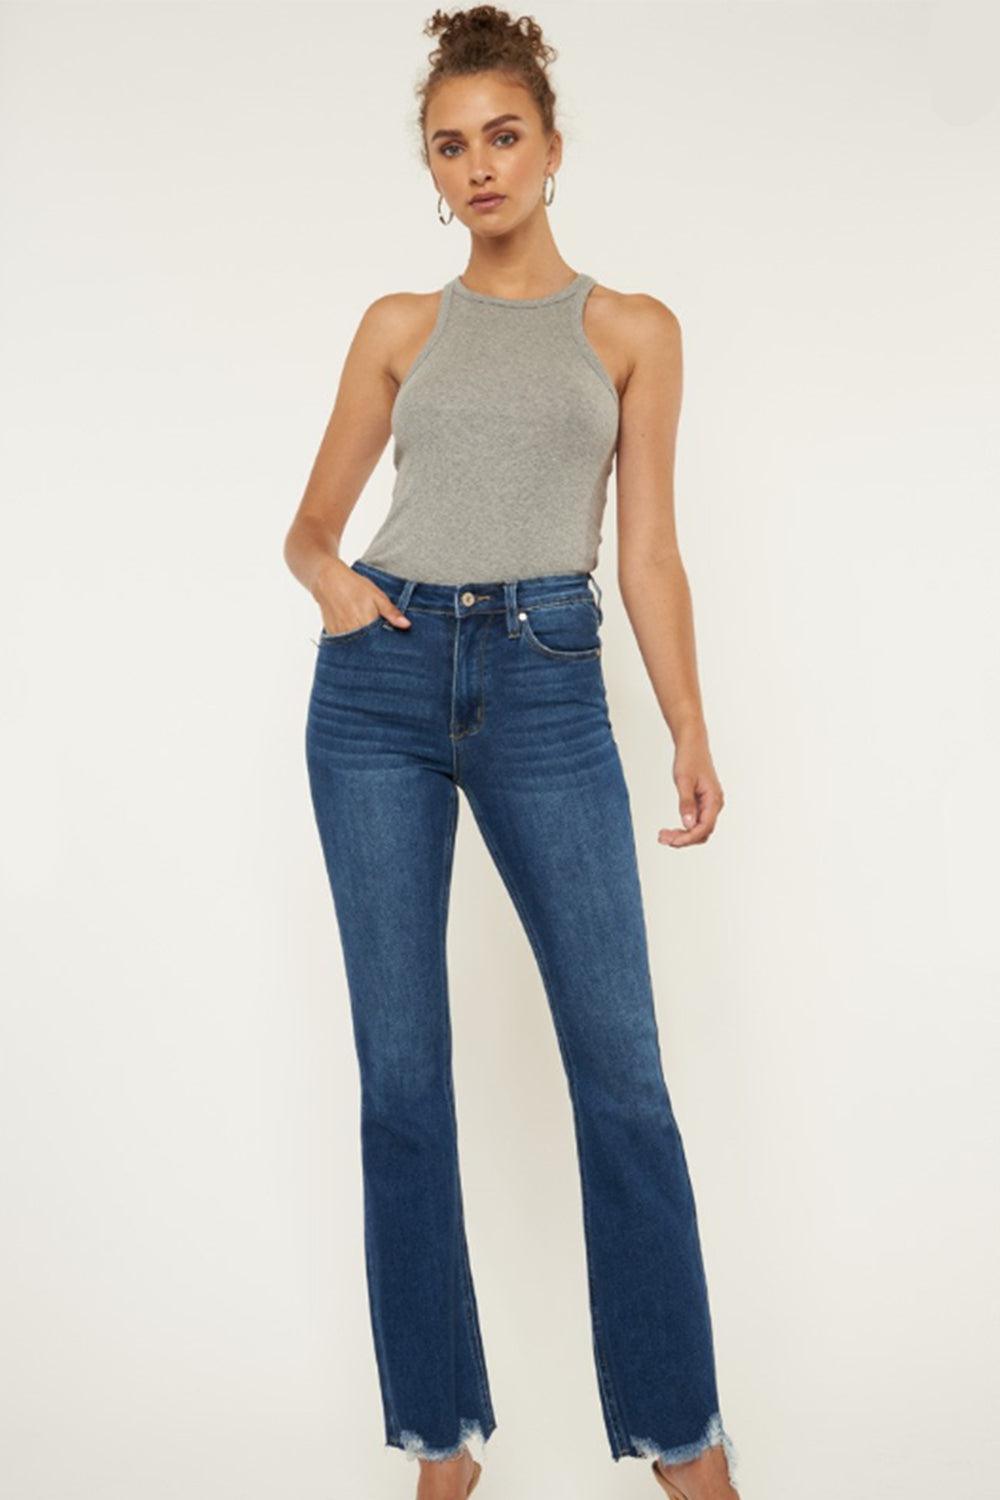 a woman in a grey tank top and jeans